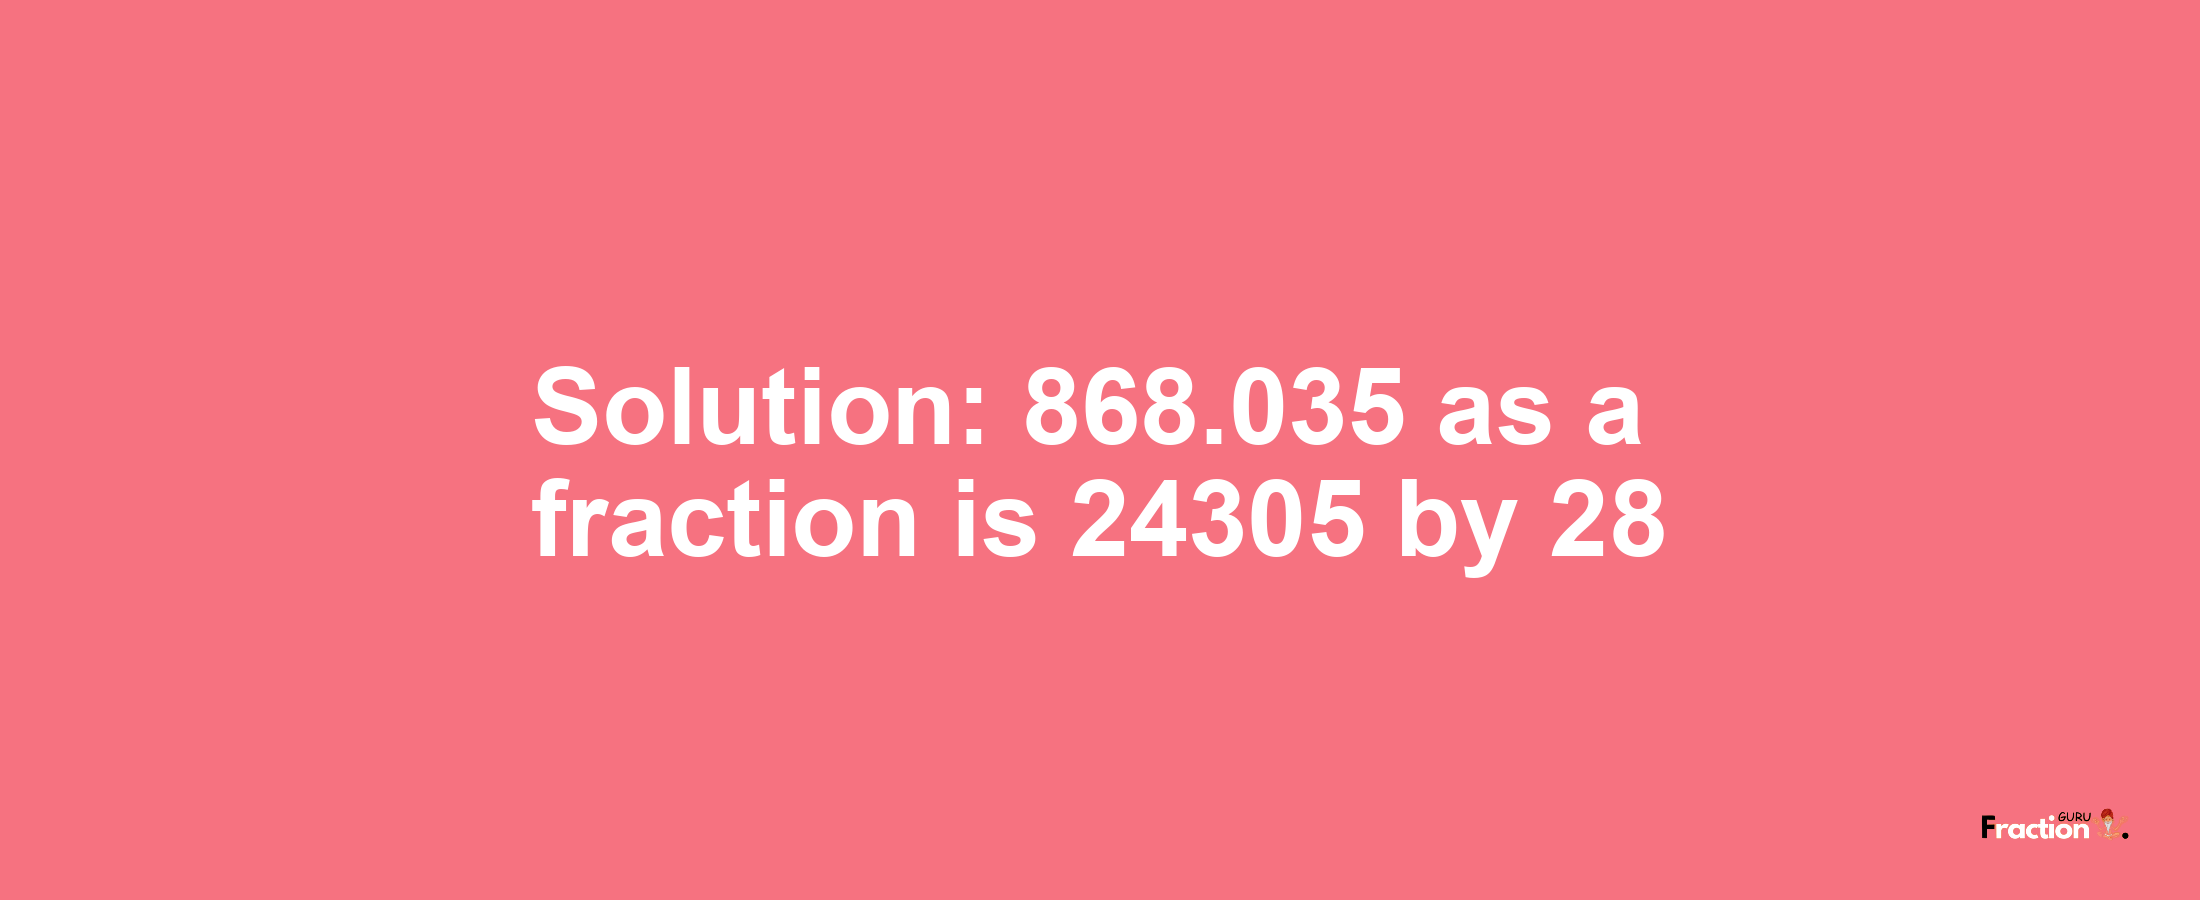 Solution:868.035 as a fraction is 24305/28